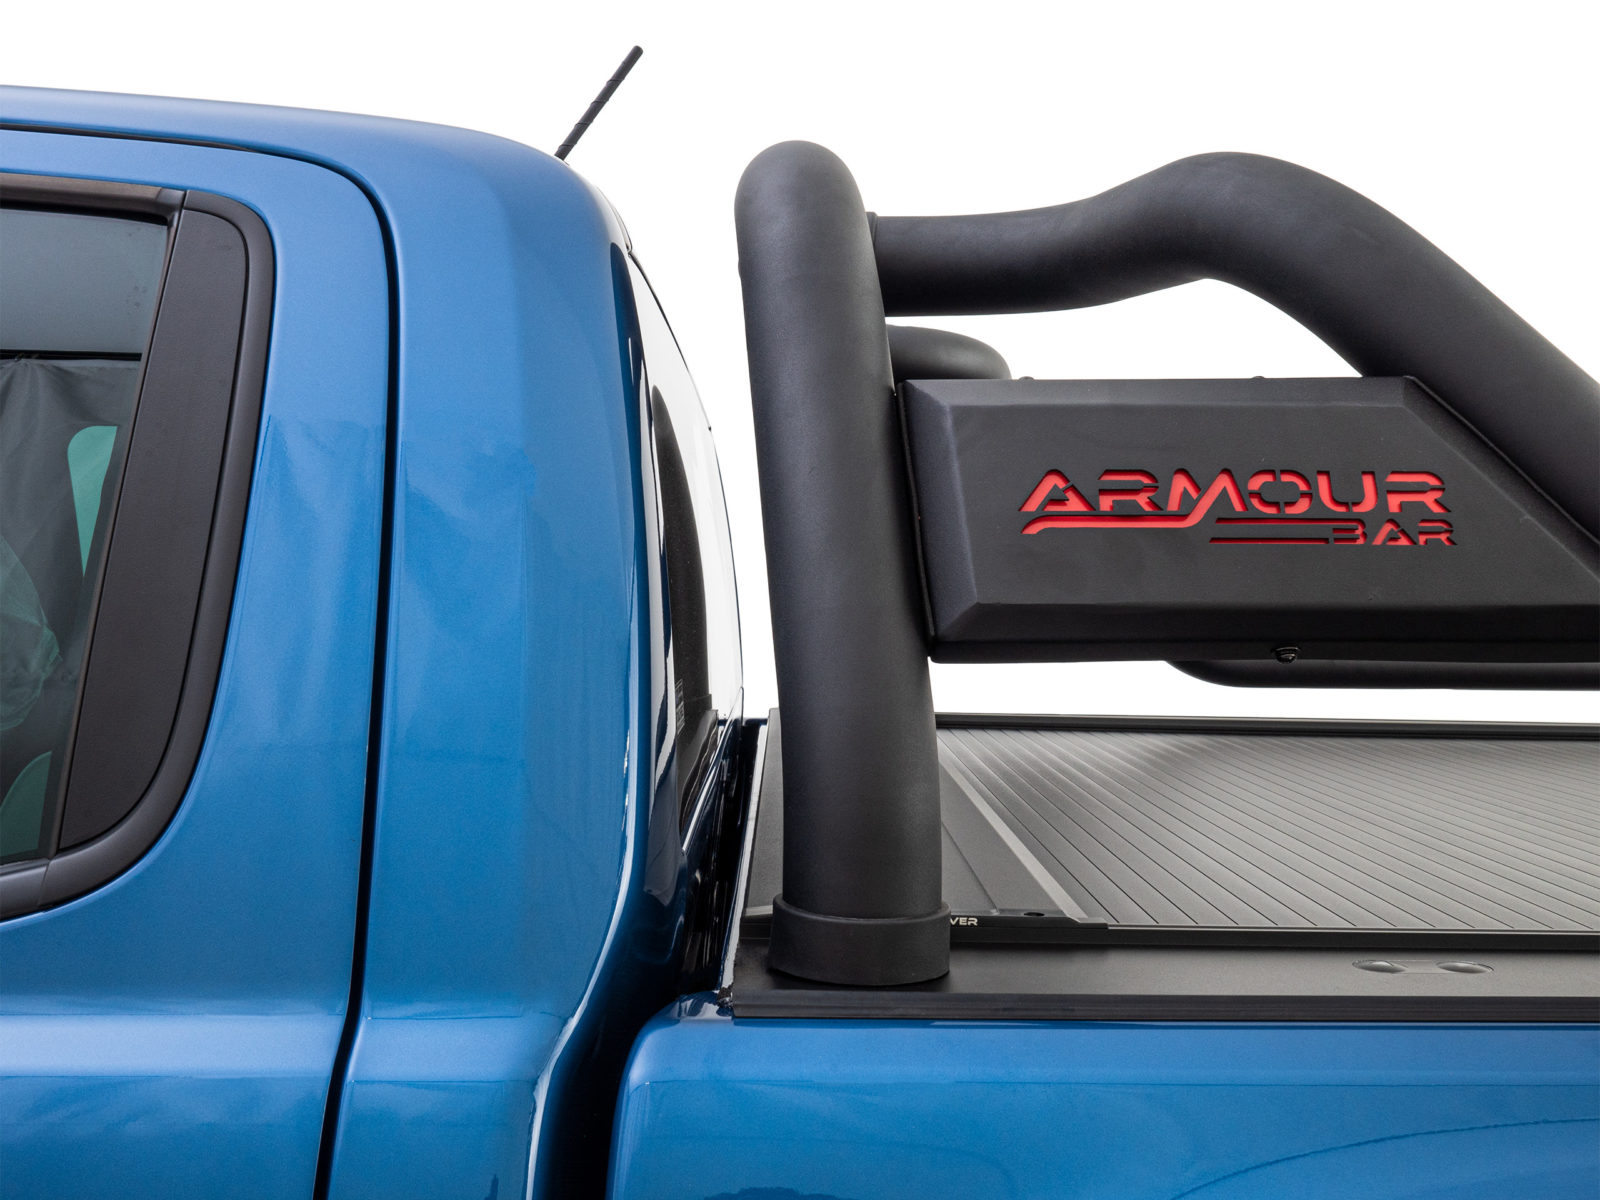 HSP Ford Ranger Raptor PX Armour Bar to suit Roll R Cover s3 (2)